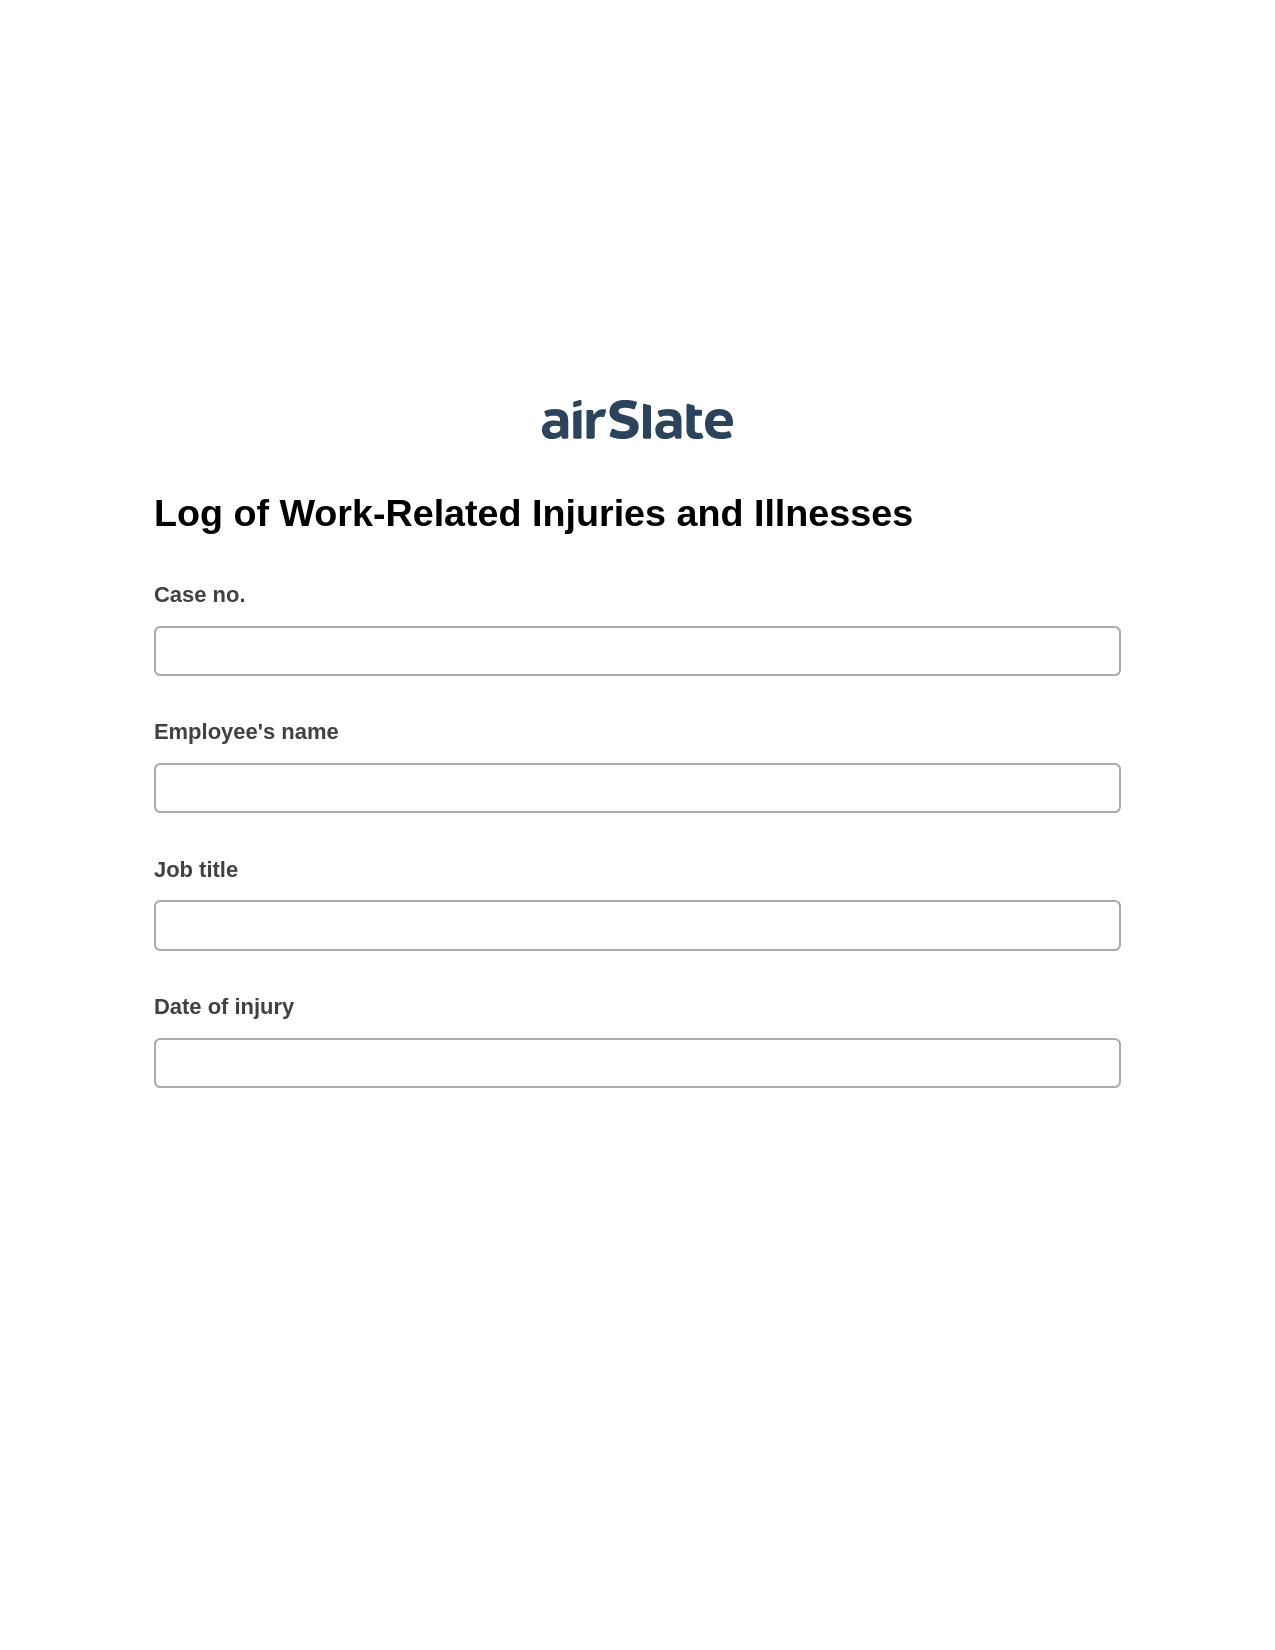 Log of Work-Related Injuries and Illnesses Pre-fill from Salesforce Records with SOQL Bot, Jira Bot, Export to MySQL Bot